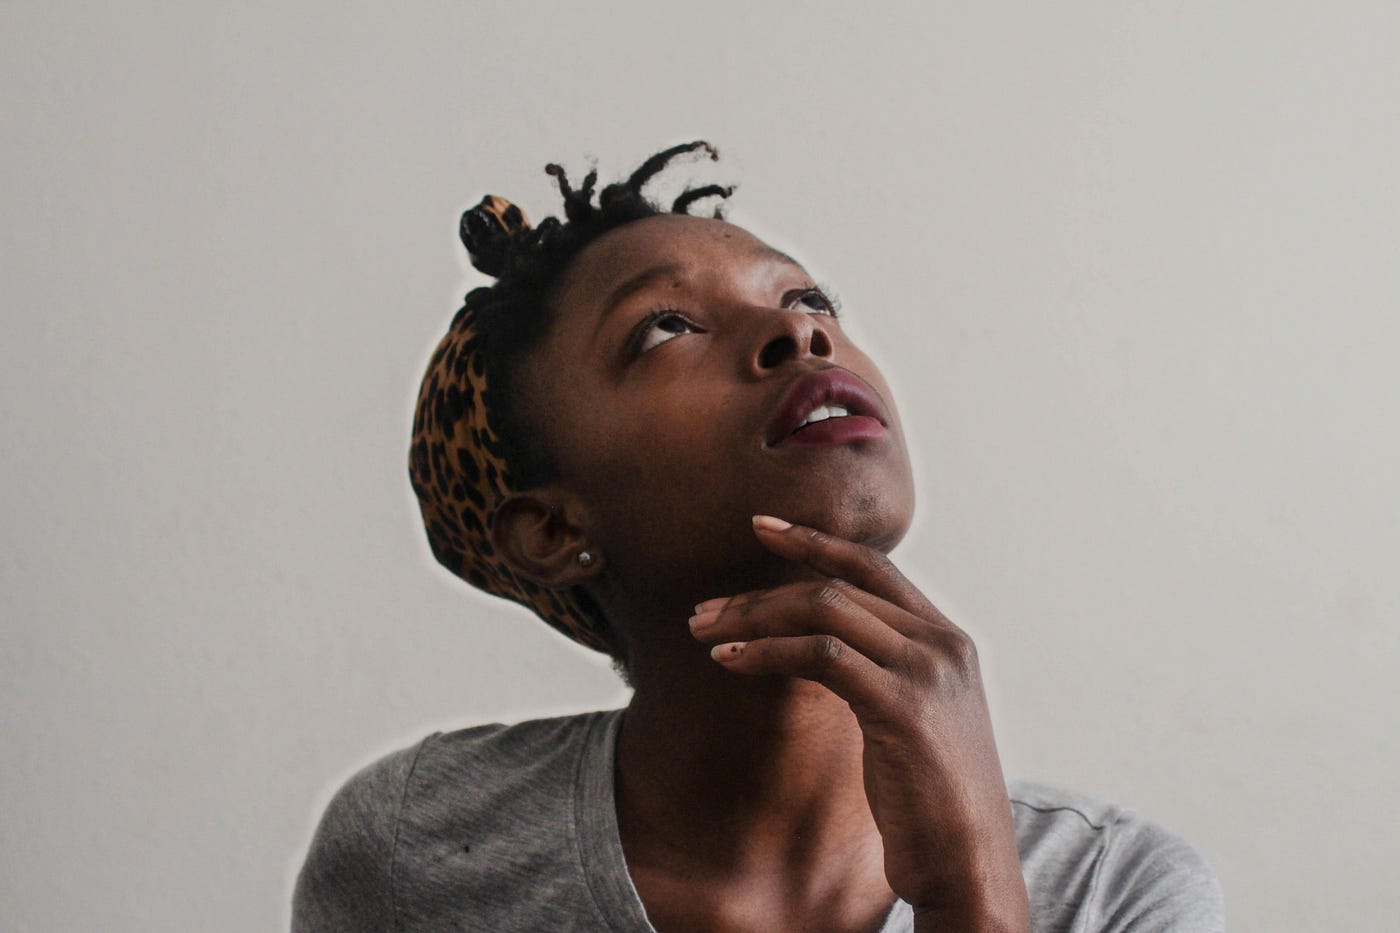 A young black woman cranes her neck up to look upwards.